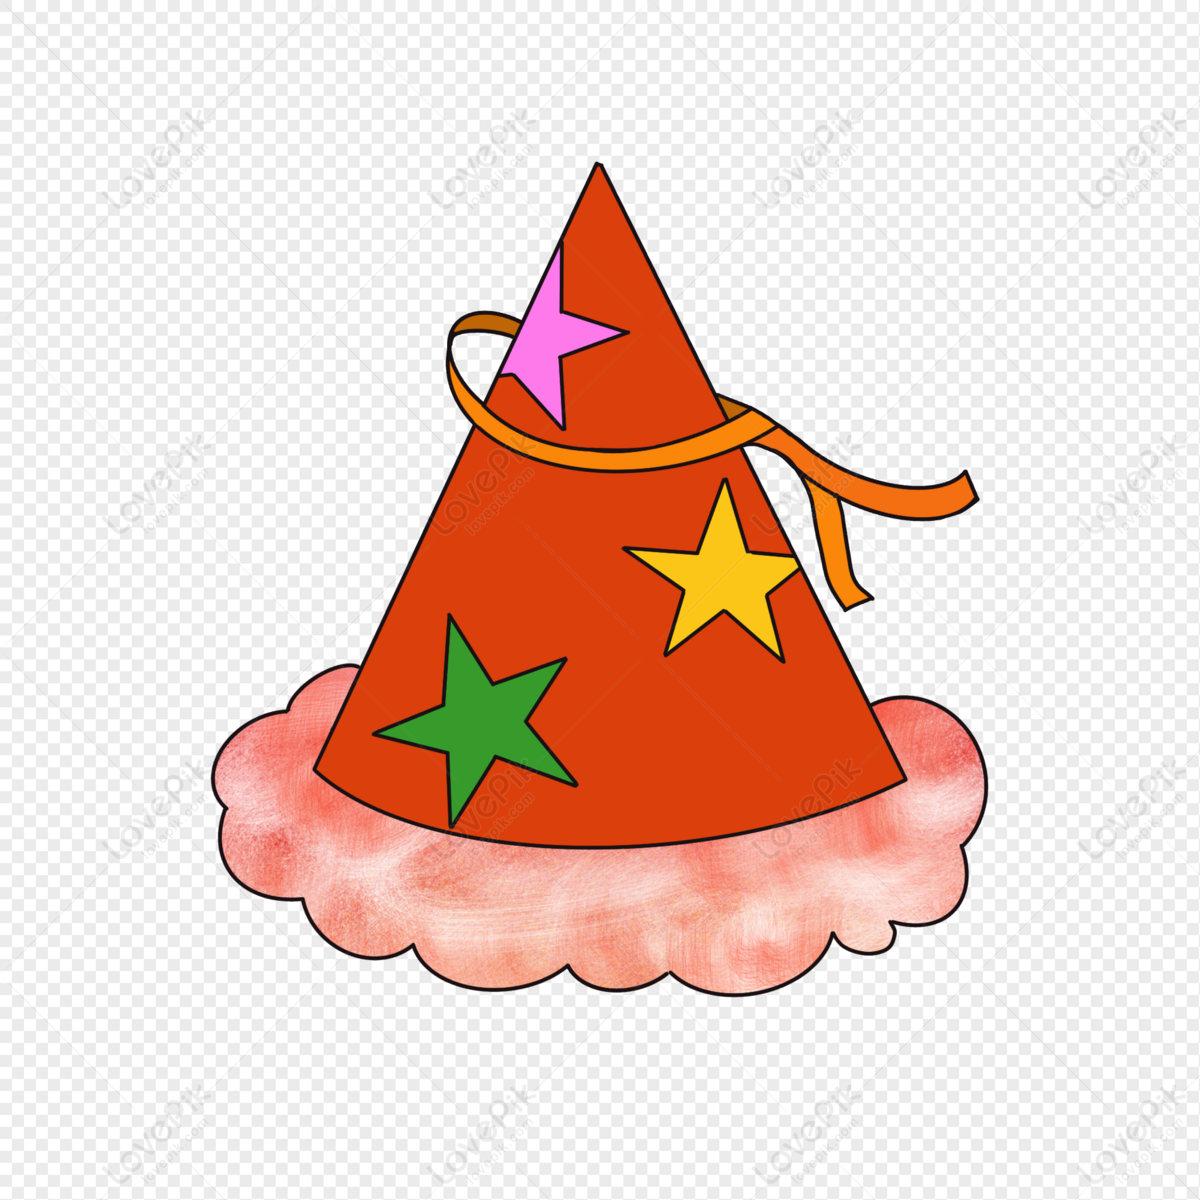 Red Birthday Hat PNG Picture And Clipart Image For Free Download - Lovepik  | 401335155